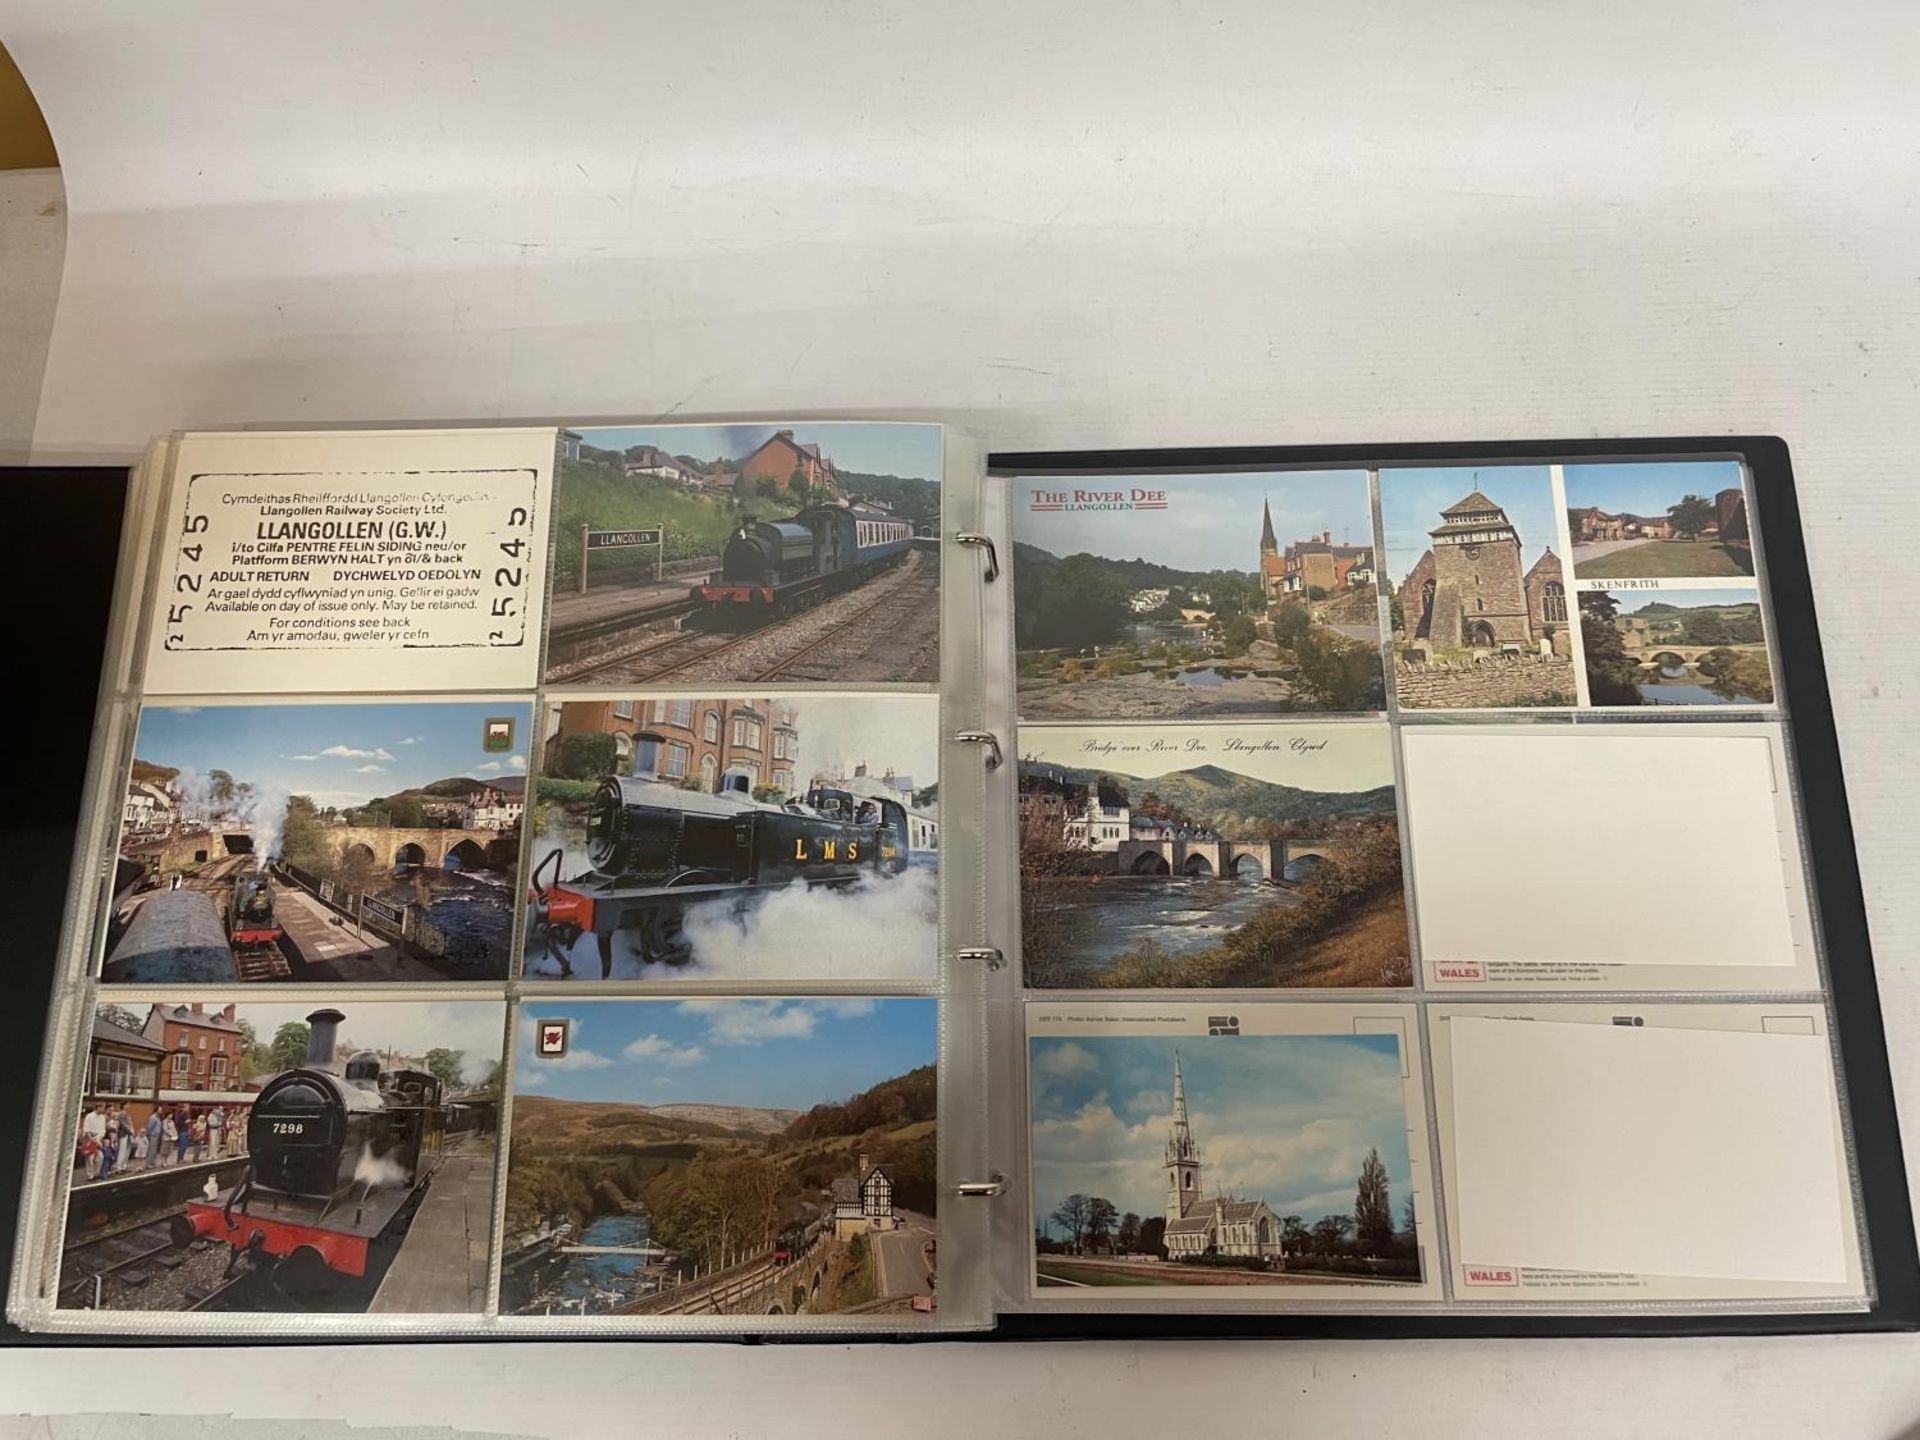 APPROXIMATELY 435 POSTCARDS RELATING TO THE ISLE OF MAN, WALES AND IRELAND IN A FOLDER - Image 13 of 15